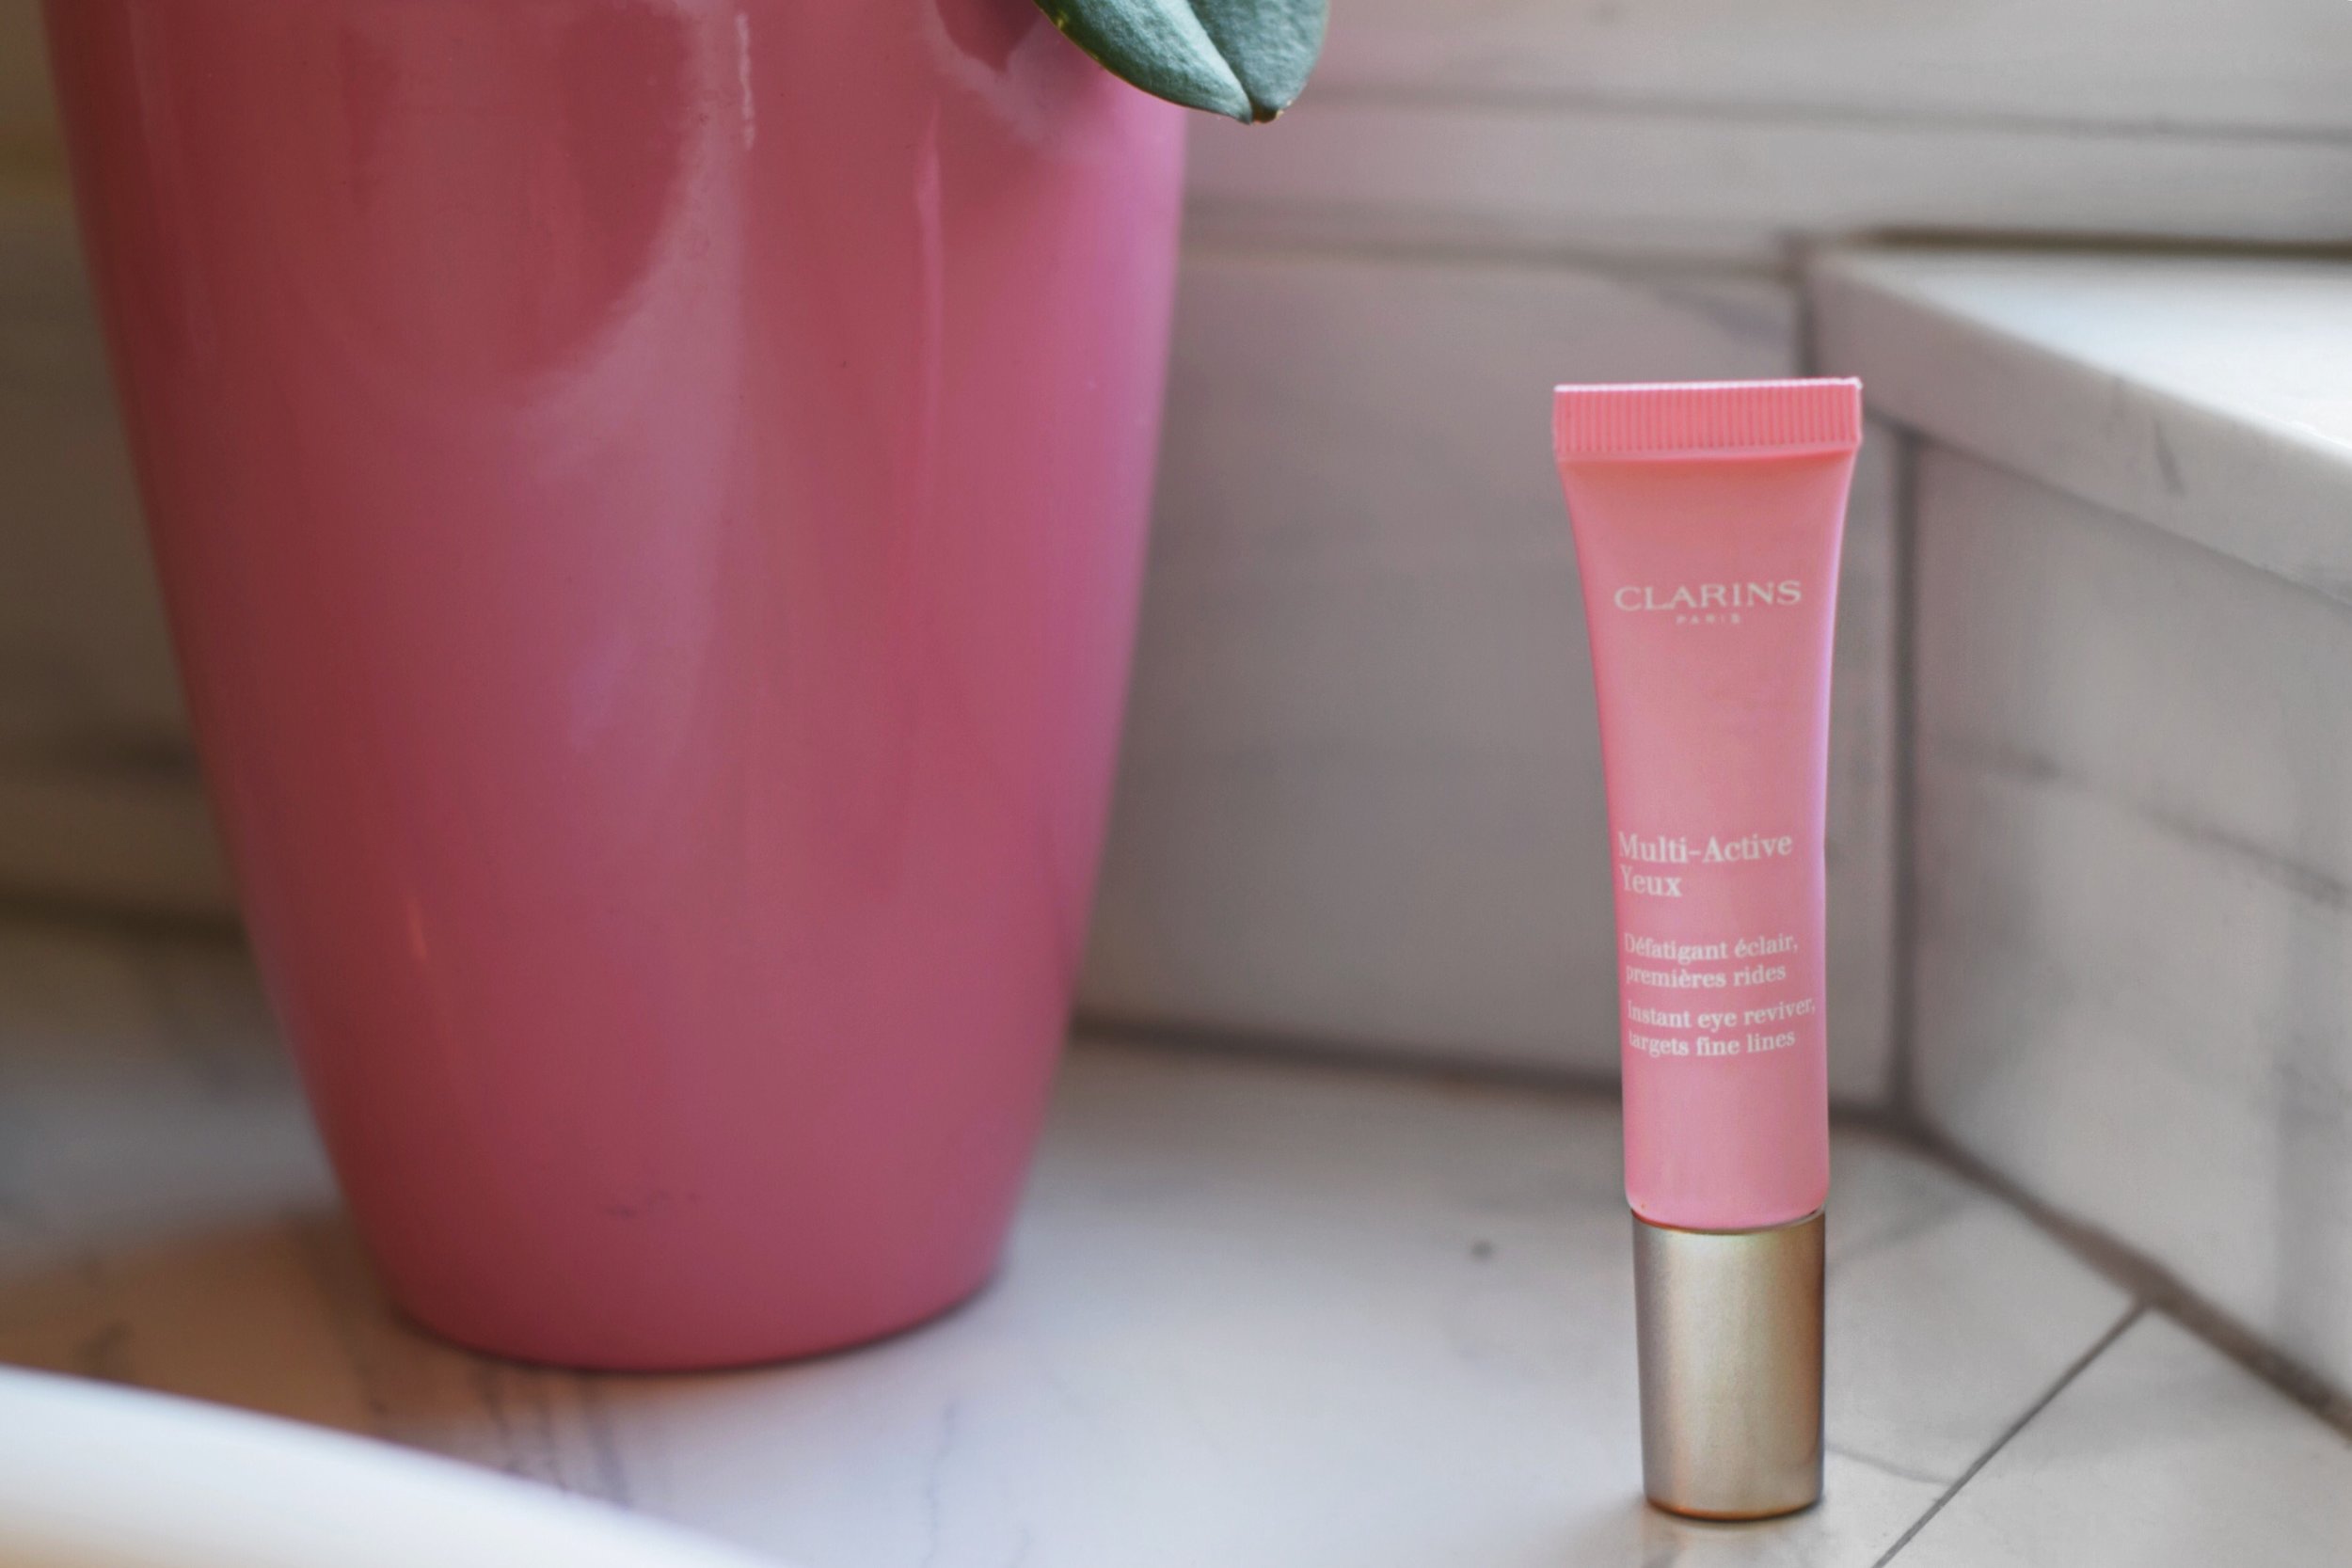 Fake A Good Night's Sleep Clarins Multi-Action Eye Cream Esther Santer Fashion Blog NYC Street Style Blogger Outfit OOTD Trendy Beauty Product Review Anti Aging Wrinkles Fine Lines Refreshing Soothing Pink Packaging Amazing Essential Buy Shop Shopping.JPG